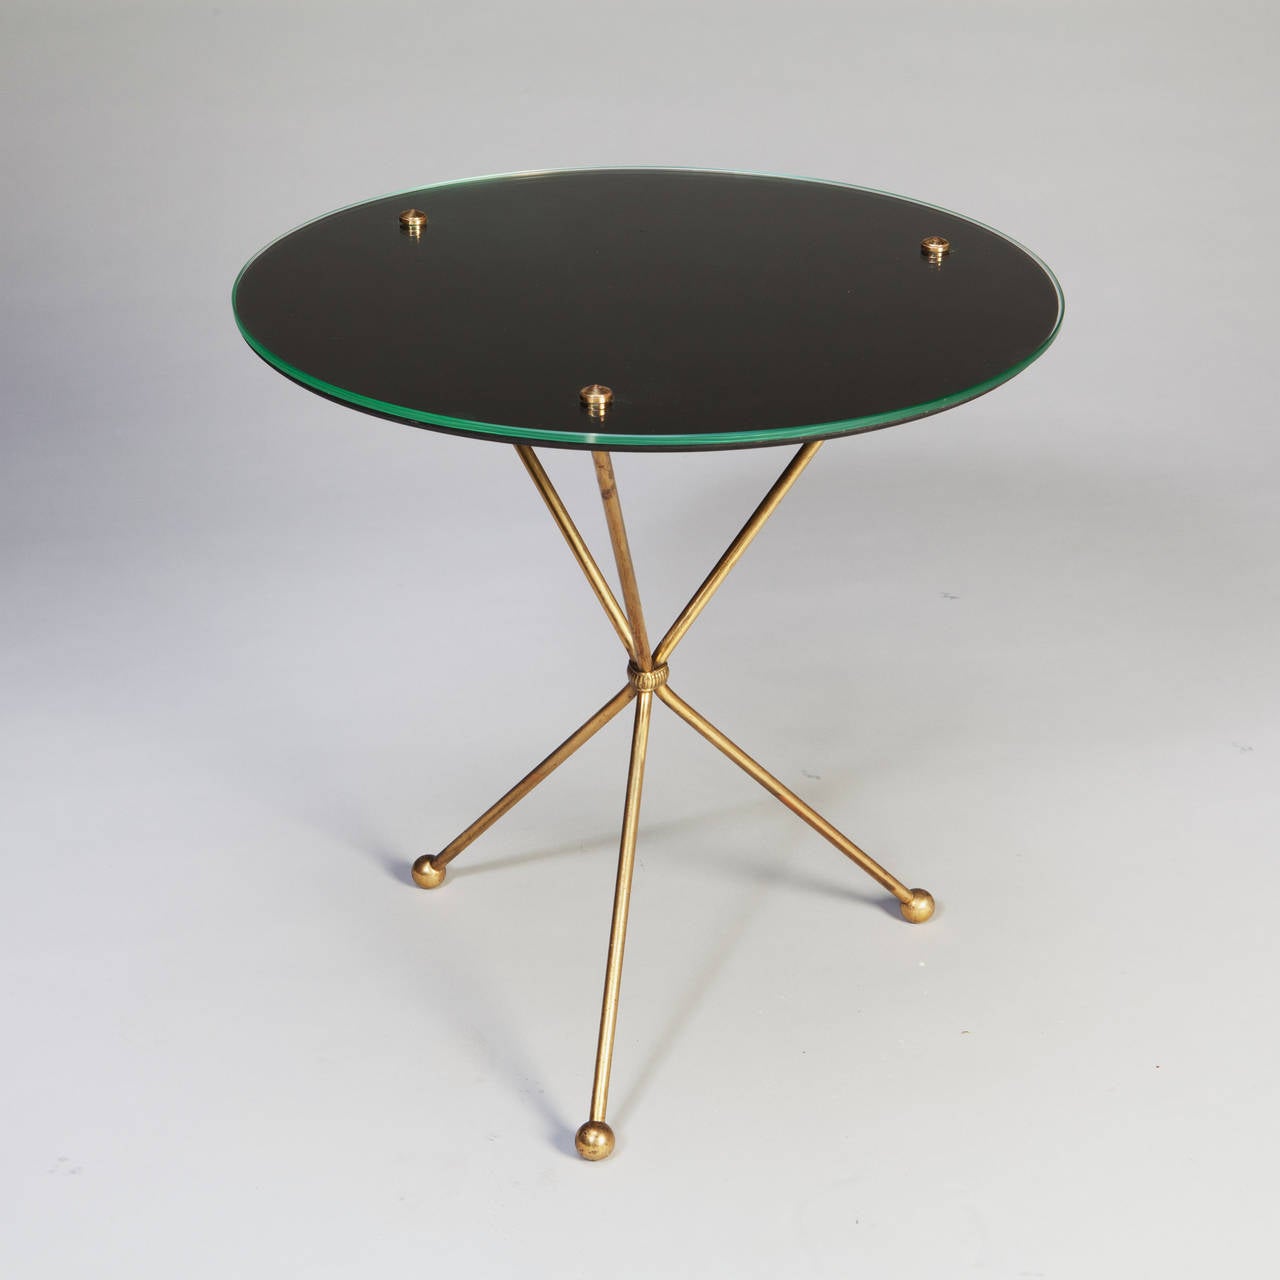 A pair of Mid-Century brass tripod end tables. The glass and black vinyl tops are held in situ by brass studs. The legs are cinched by a reeded strap. After the design of Jean Michel Frank.